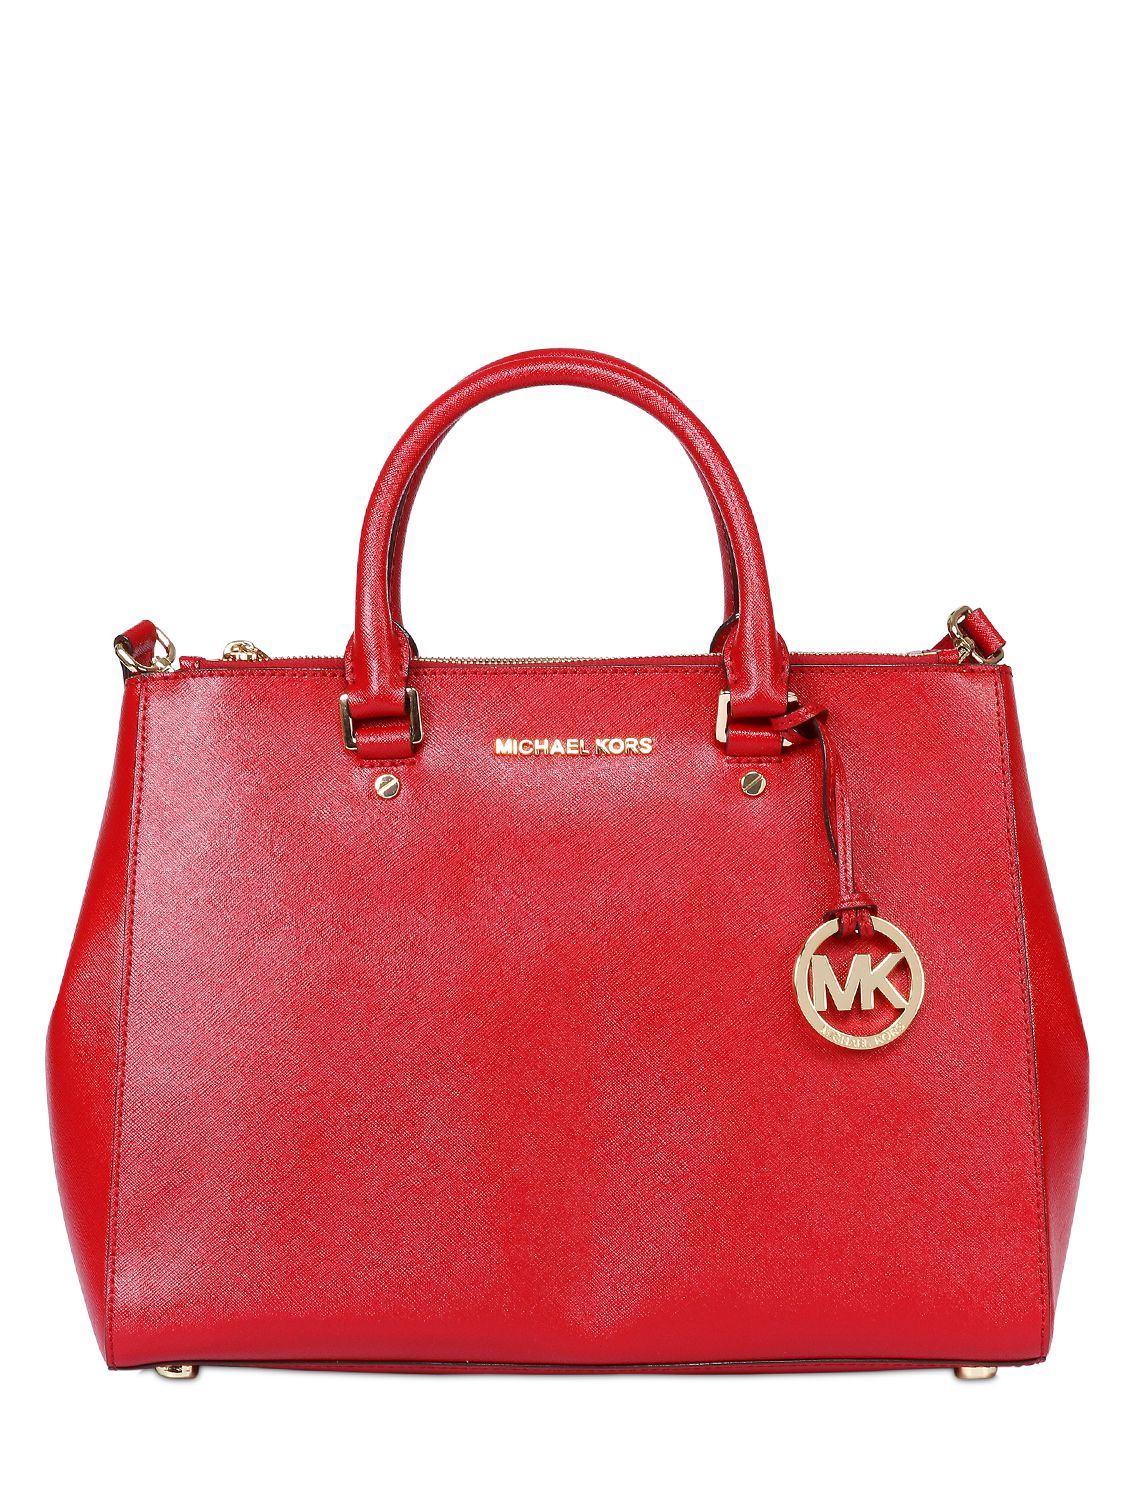 Michael Michael Kors Large Sutton Saffiano Patent Leather Bag in Red | Lyst